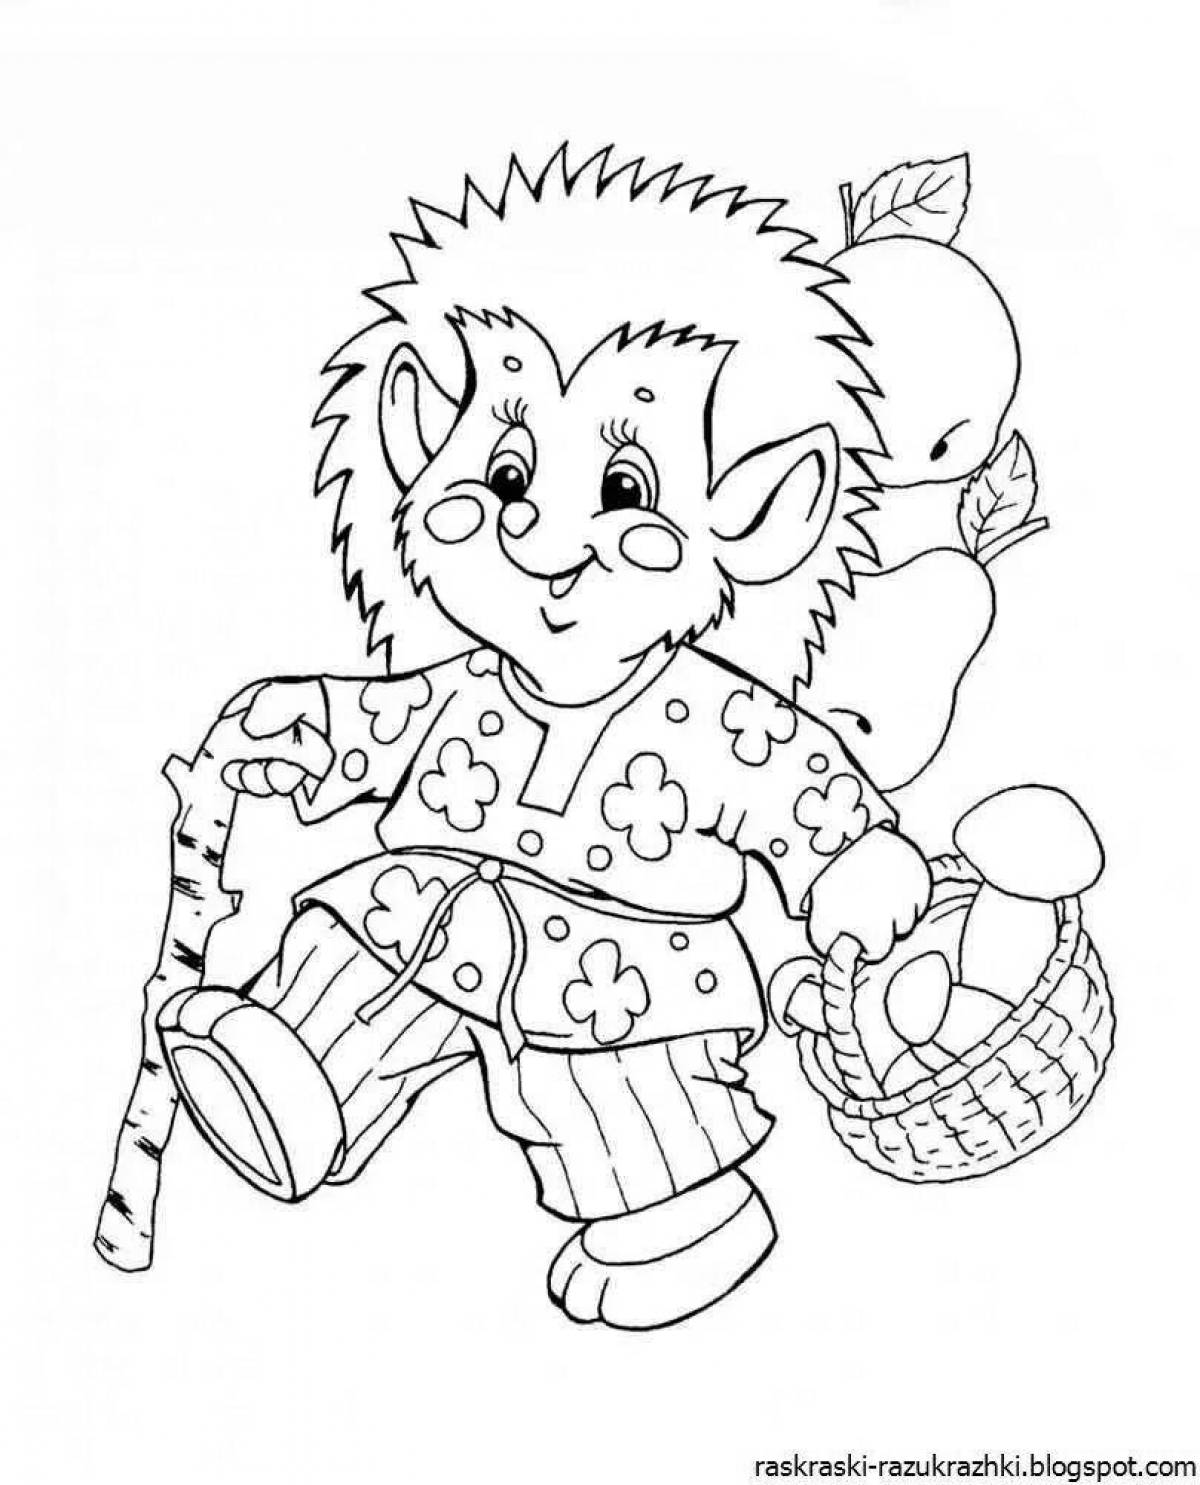 Colorful fairy tale character coloring book for preschoolers